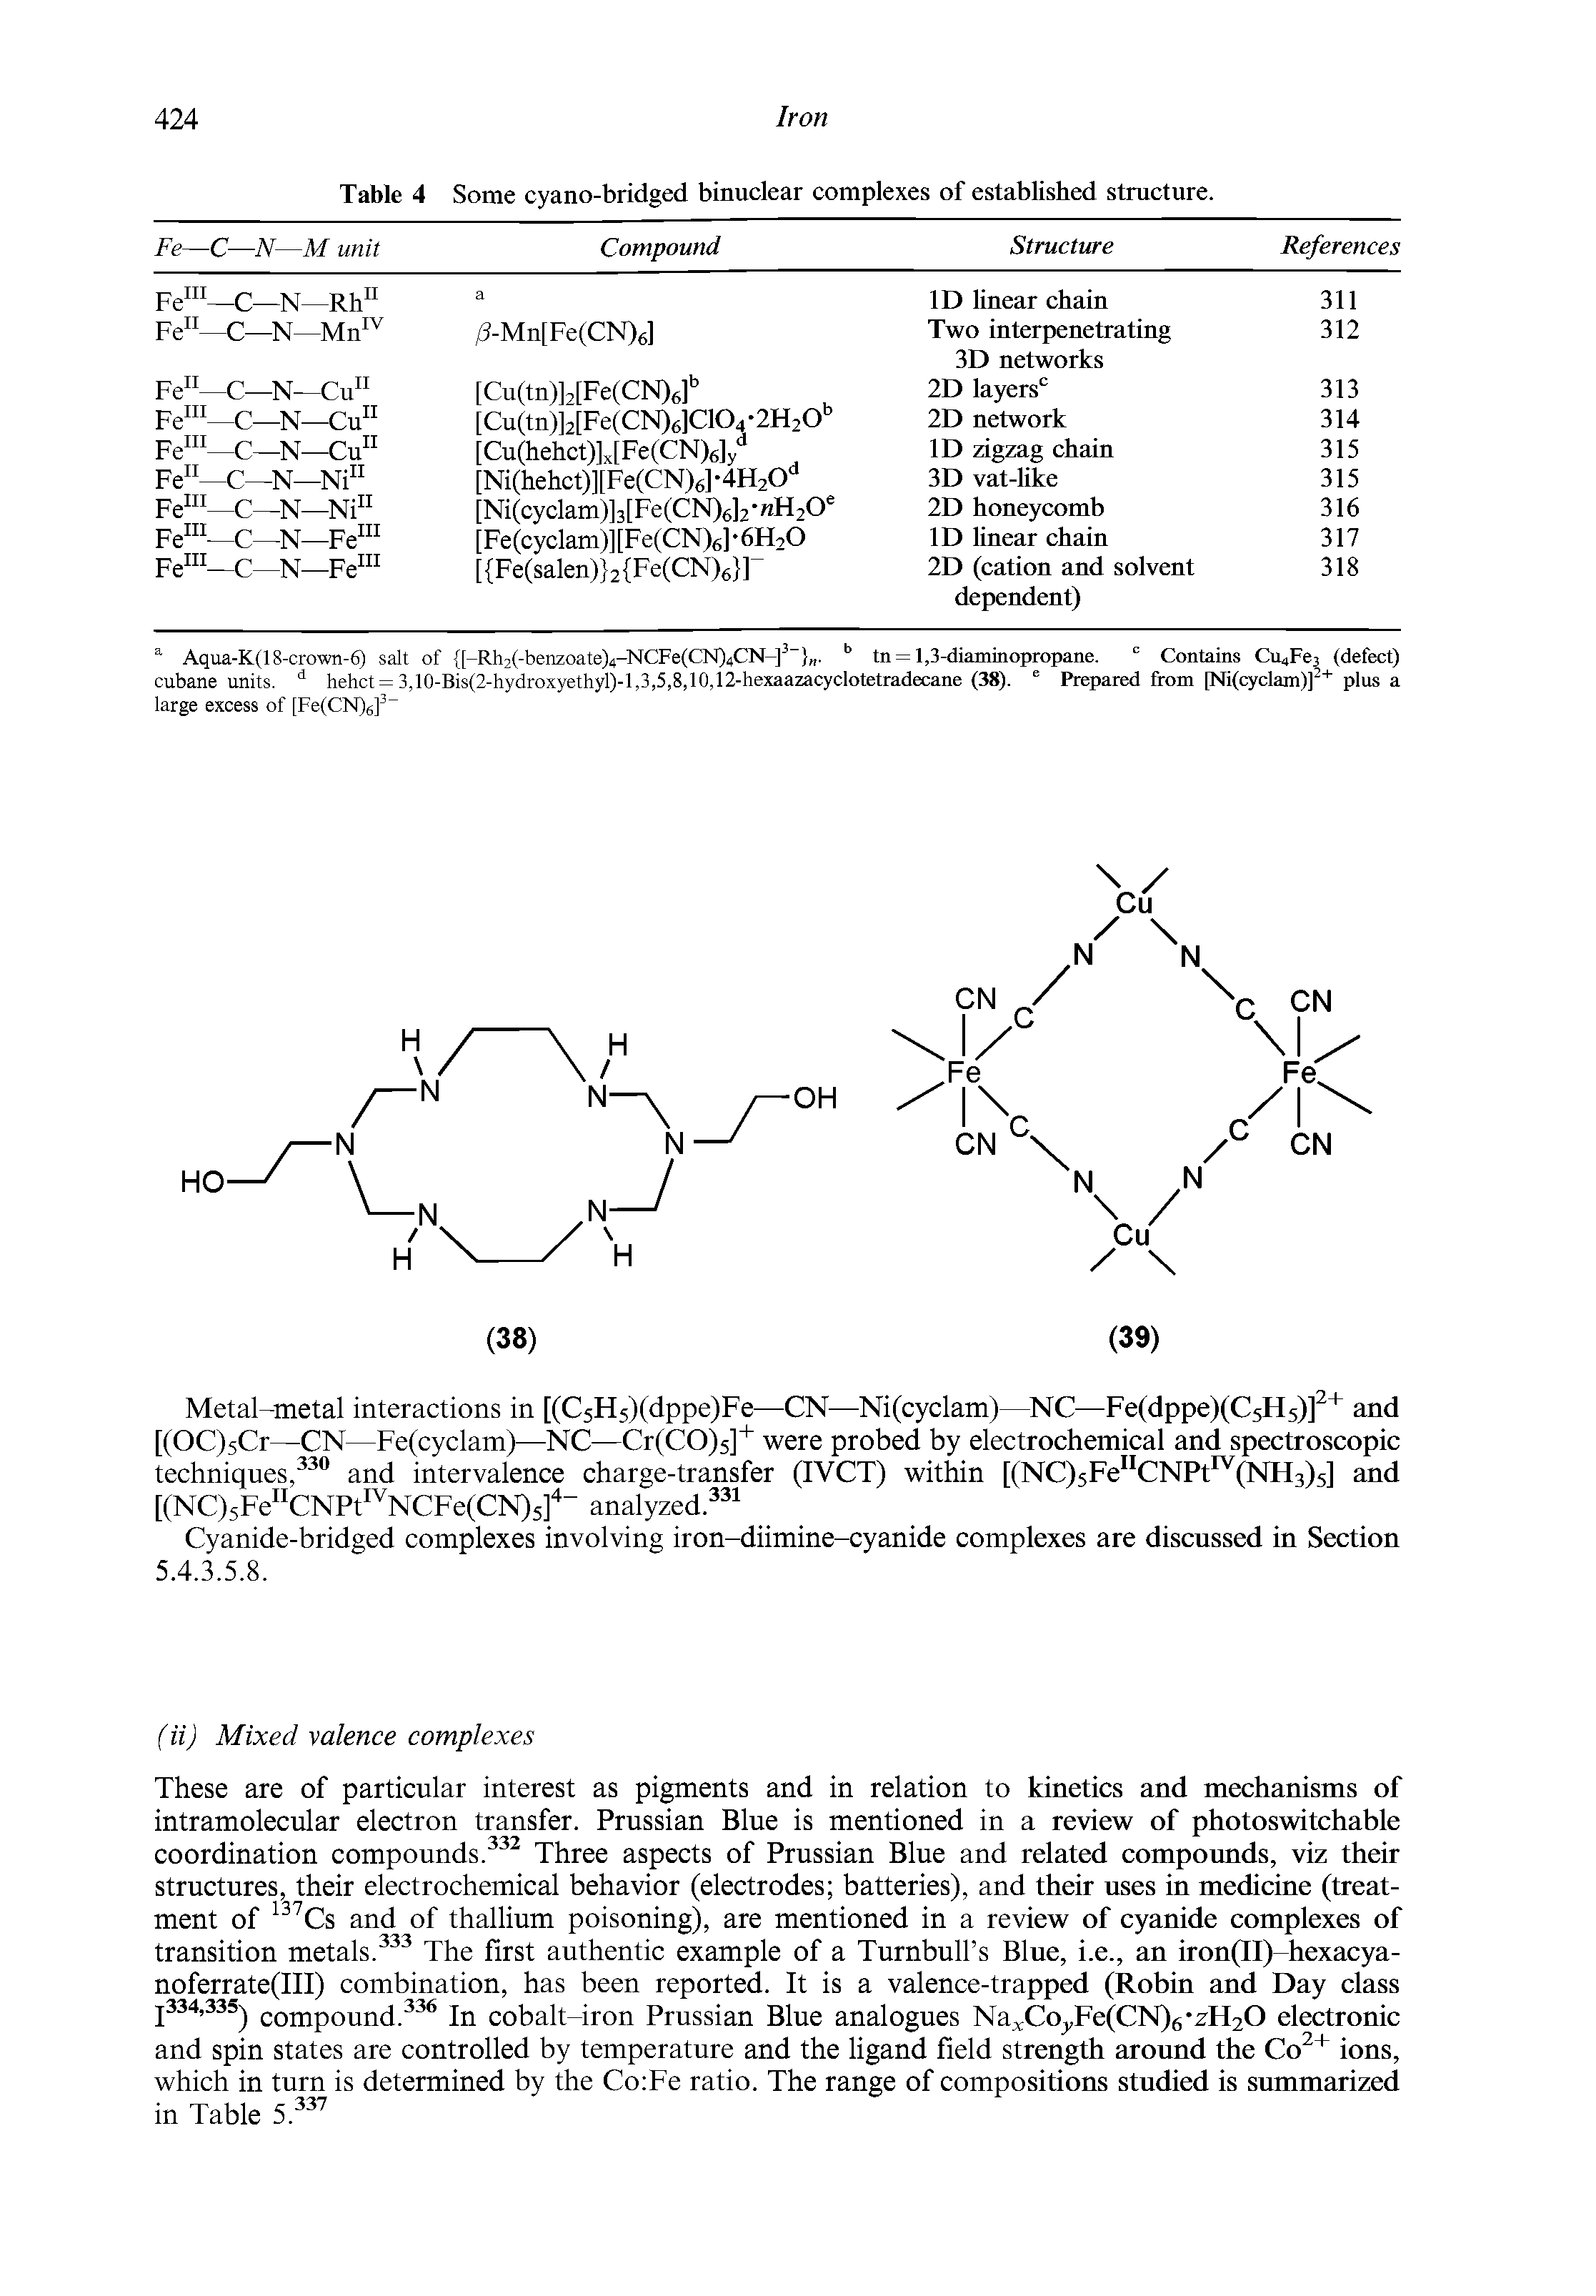 Table 4 Some cyano-bridged binuclear complexes of established structure.